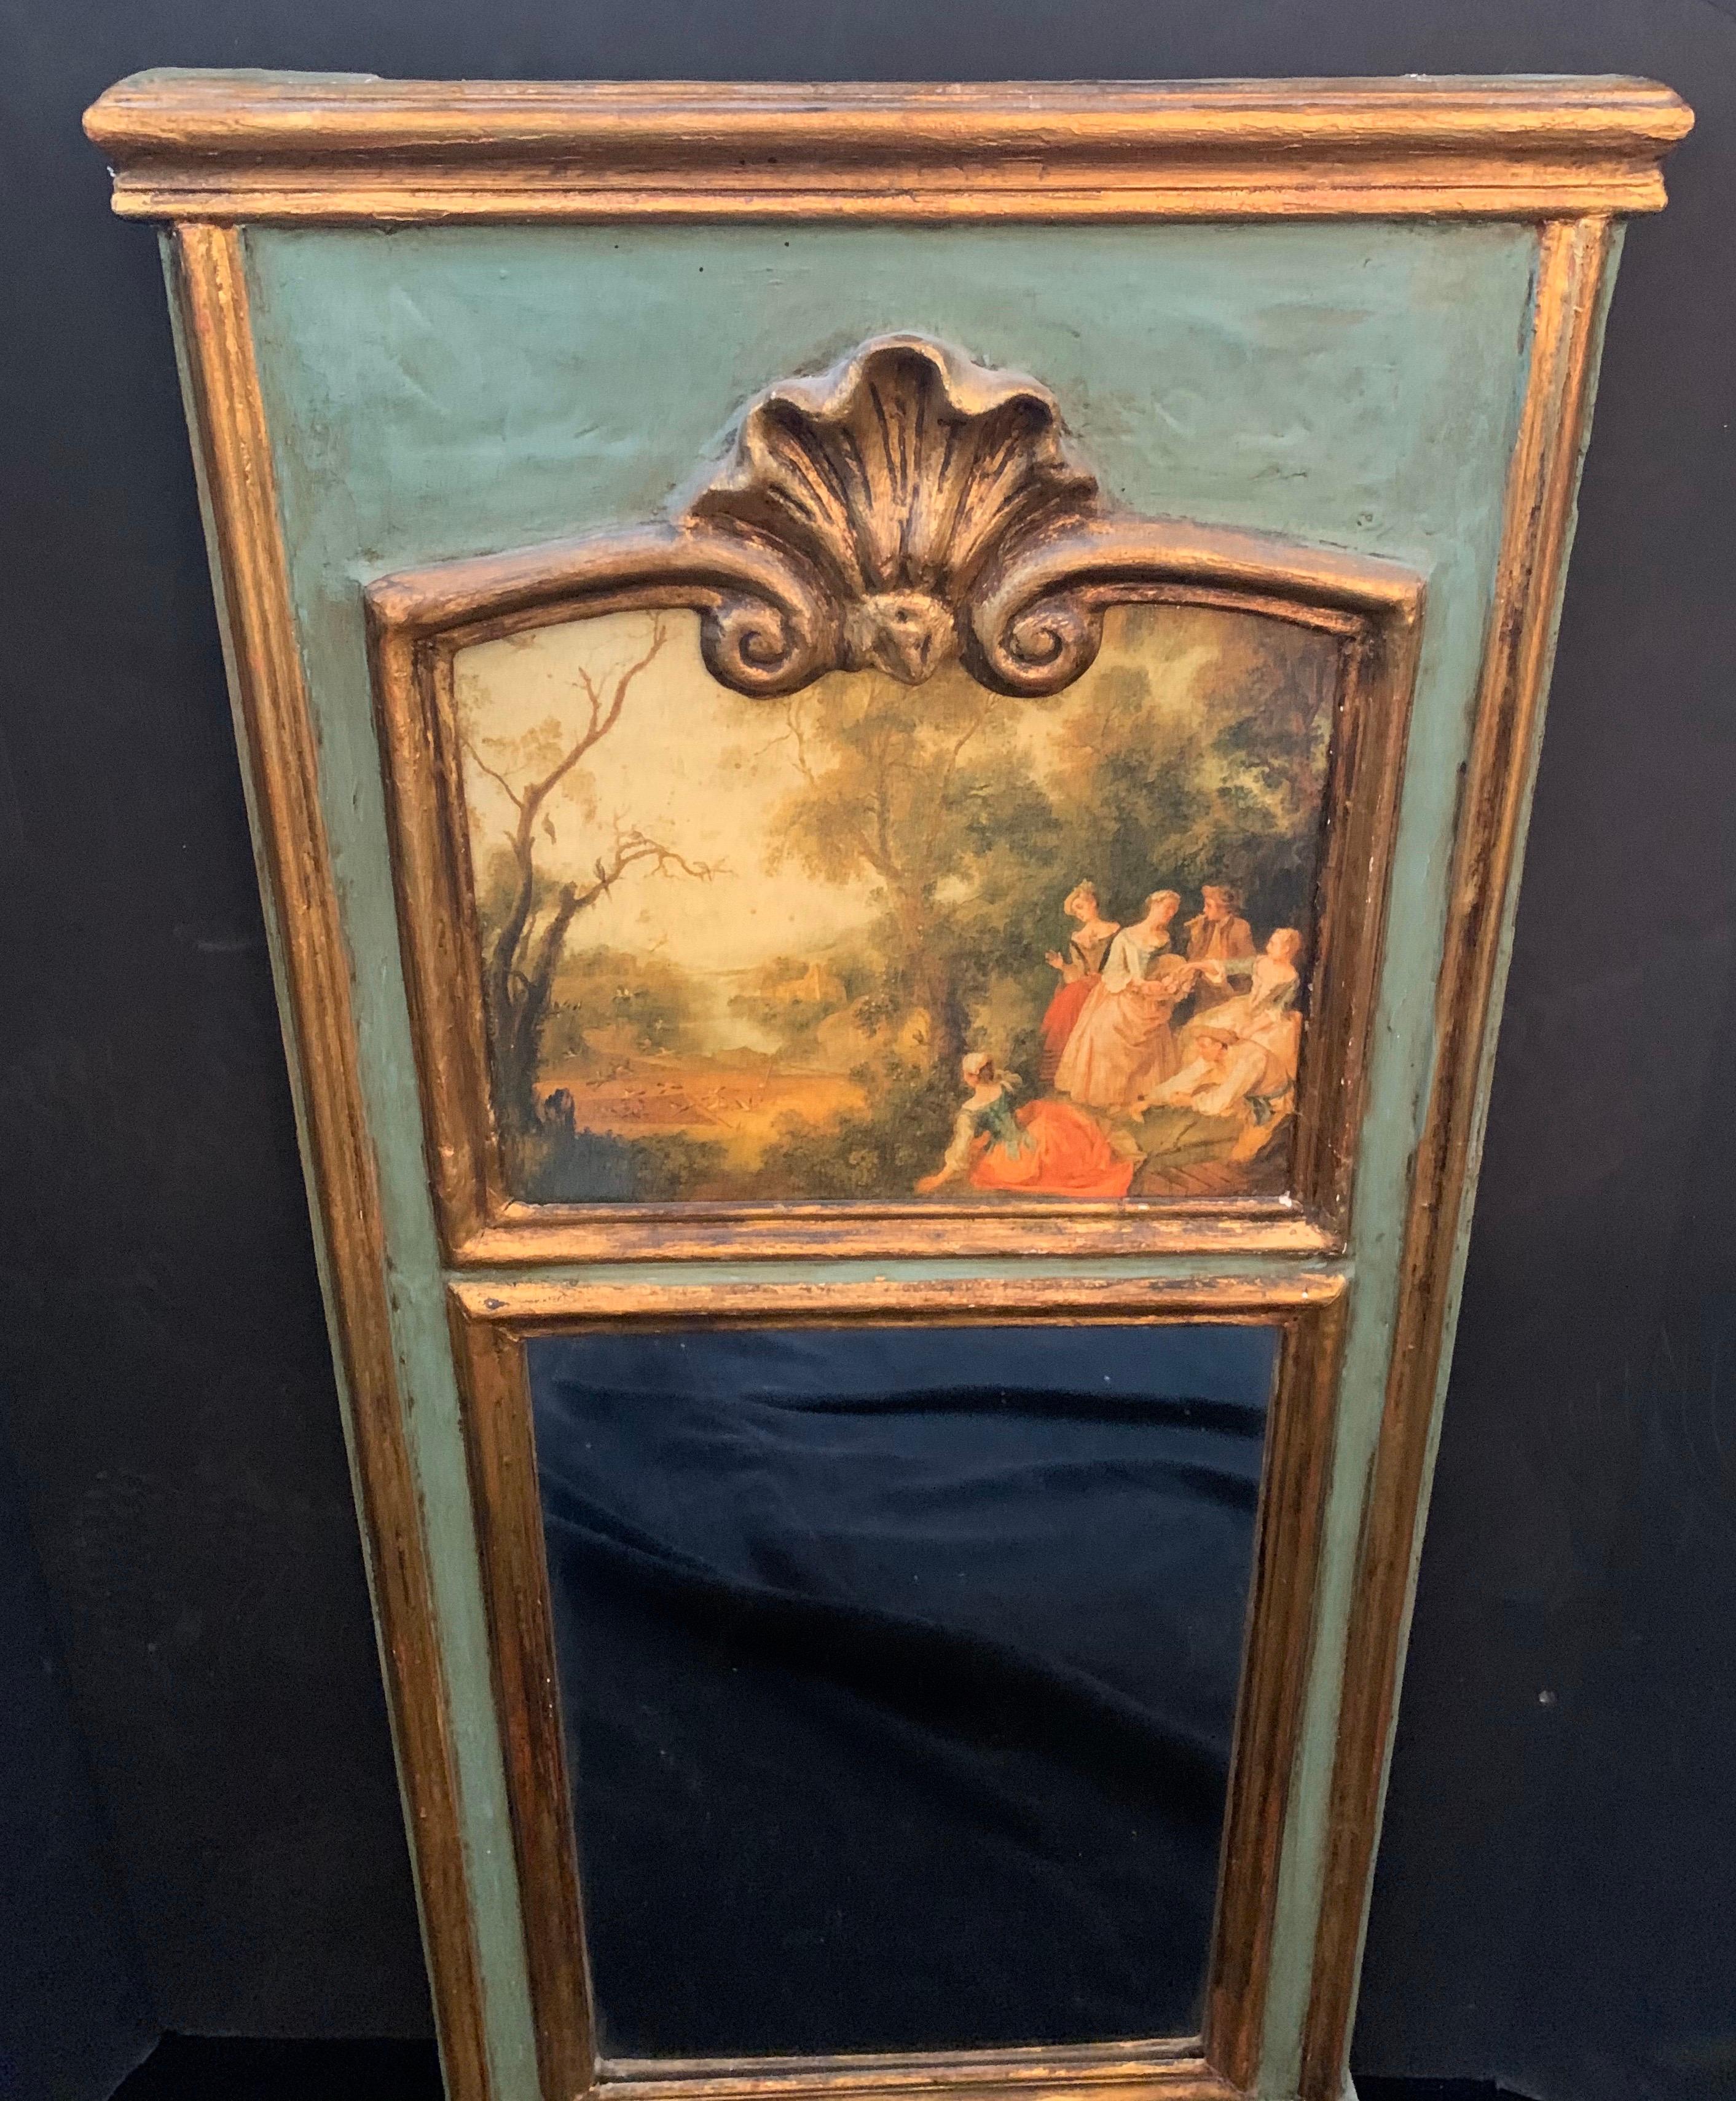 A wonderful French green and gold giltwood trumeau mirror depicting a courting garden landscape scene, makes a charming addition to any space.